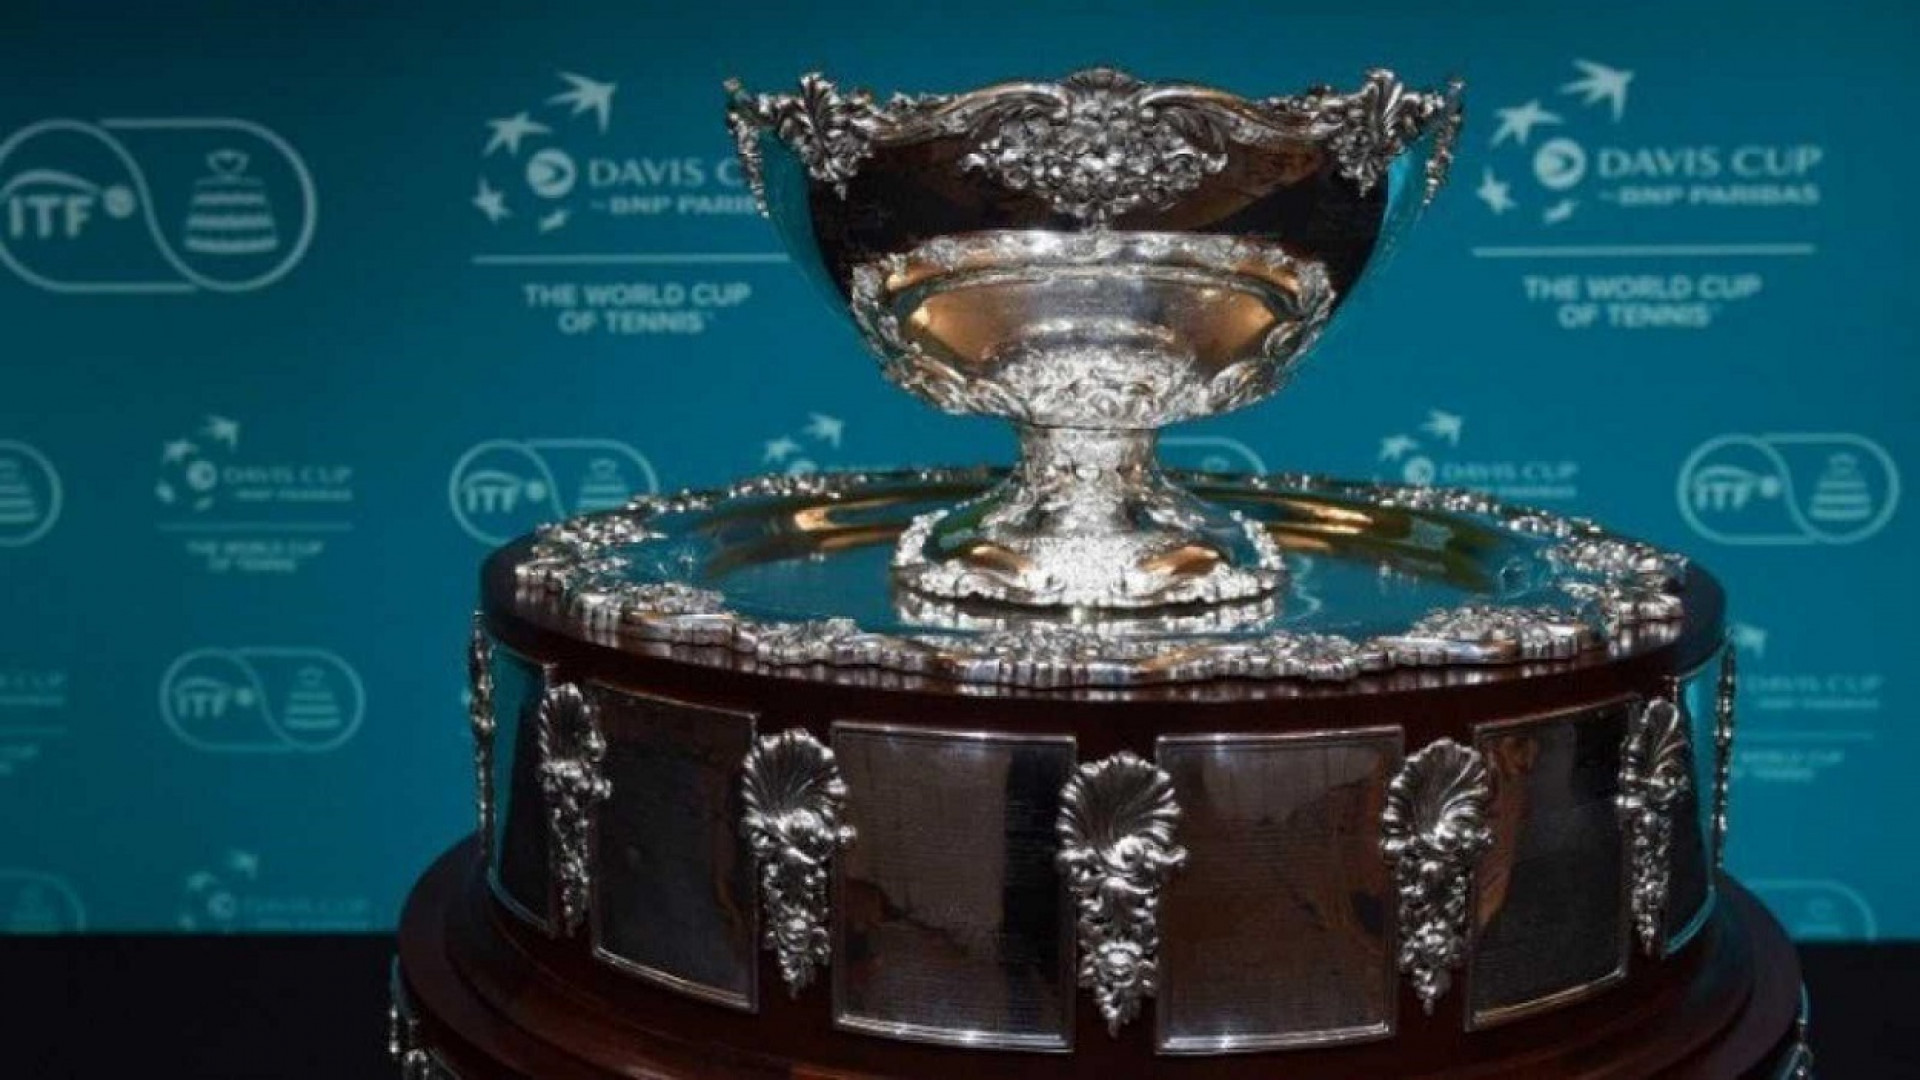 Argentina will make their debut against Sweden in the Davis Cup in September